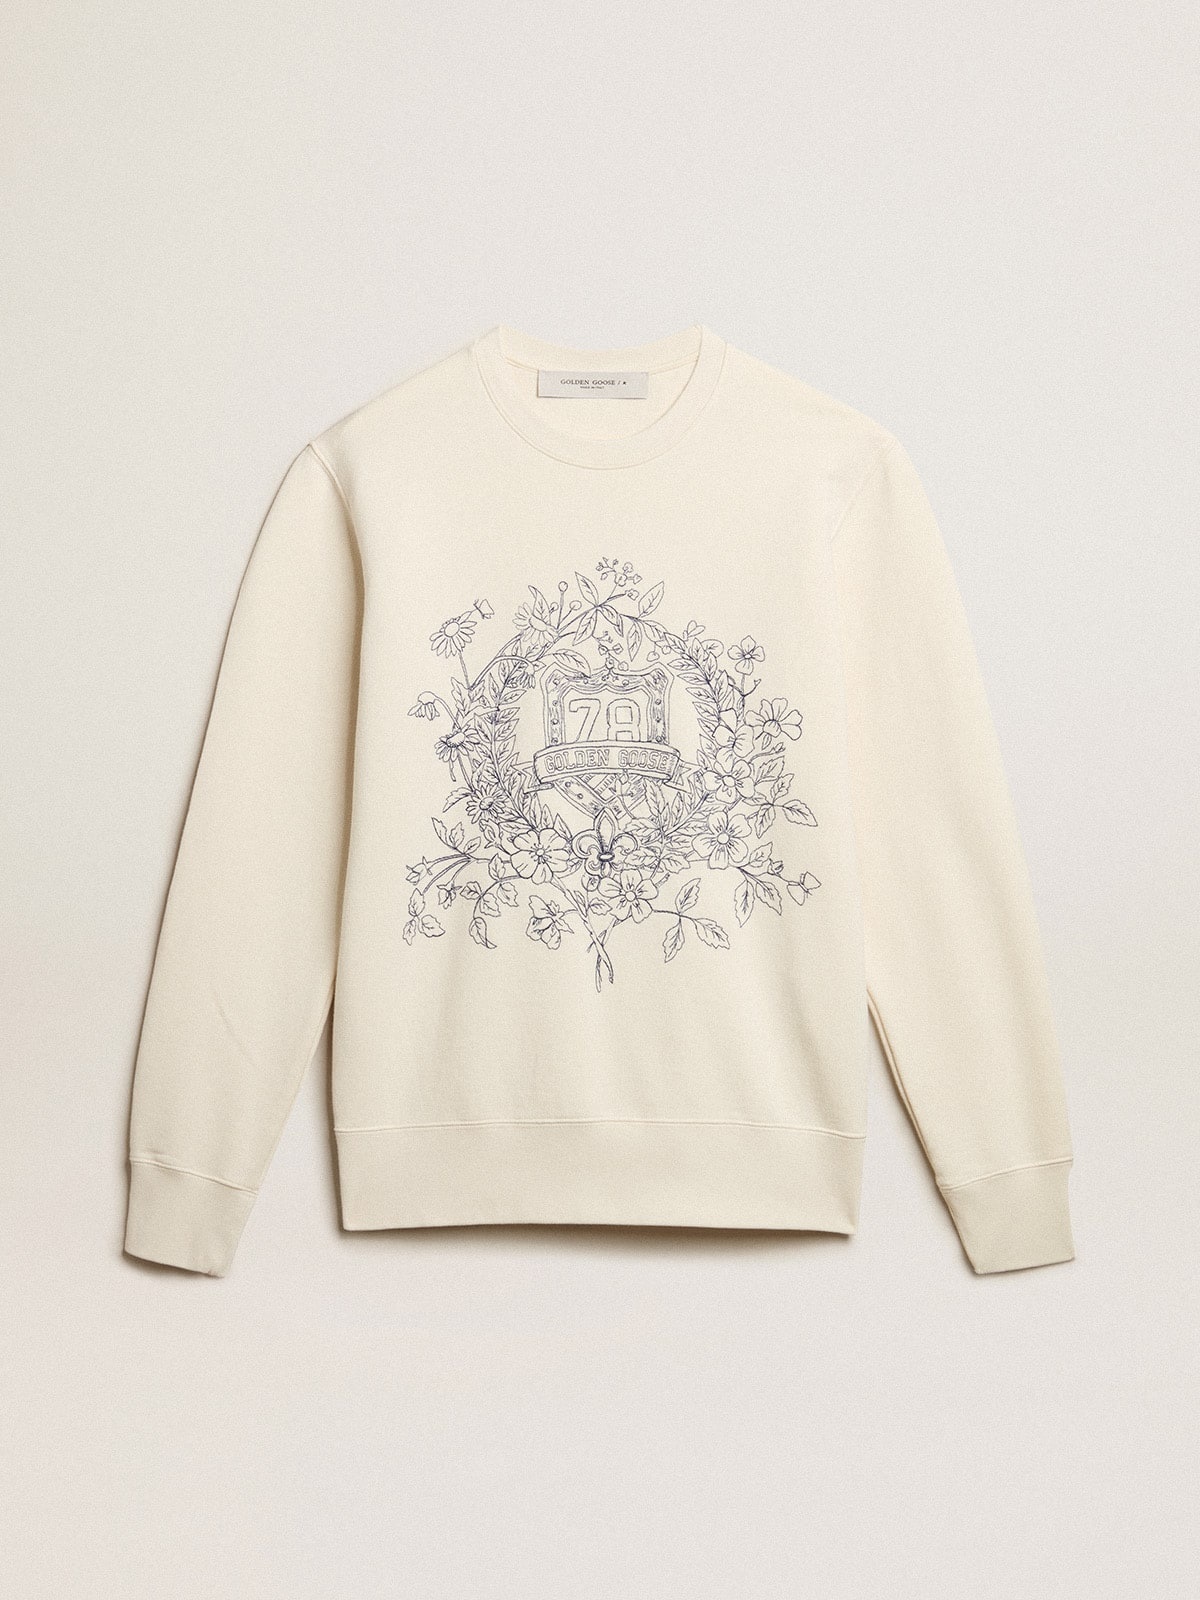 Men's aged white cotton sweatshirt with embroidery on the front - 1